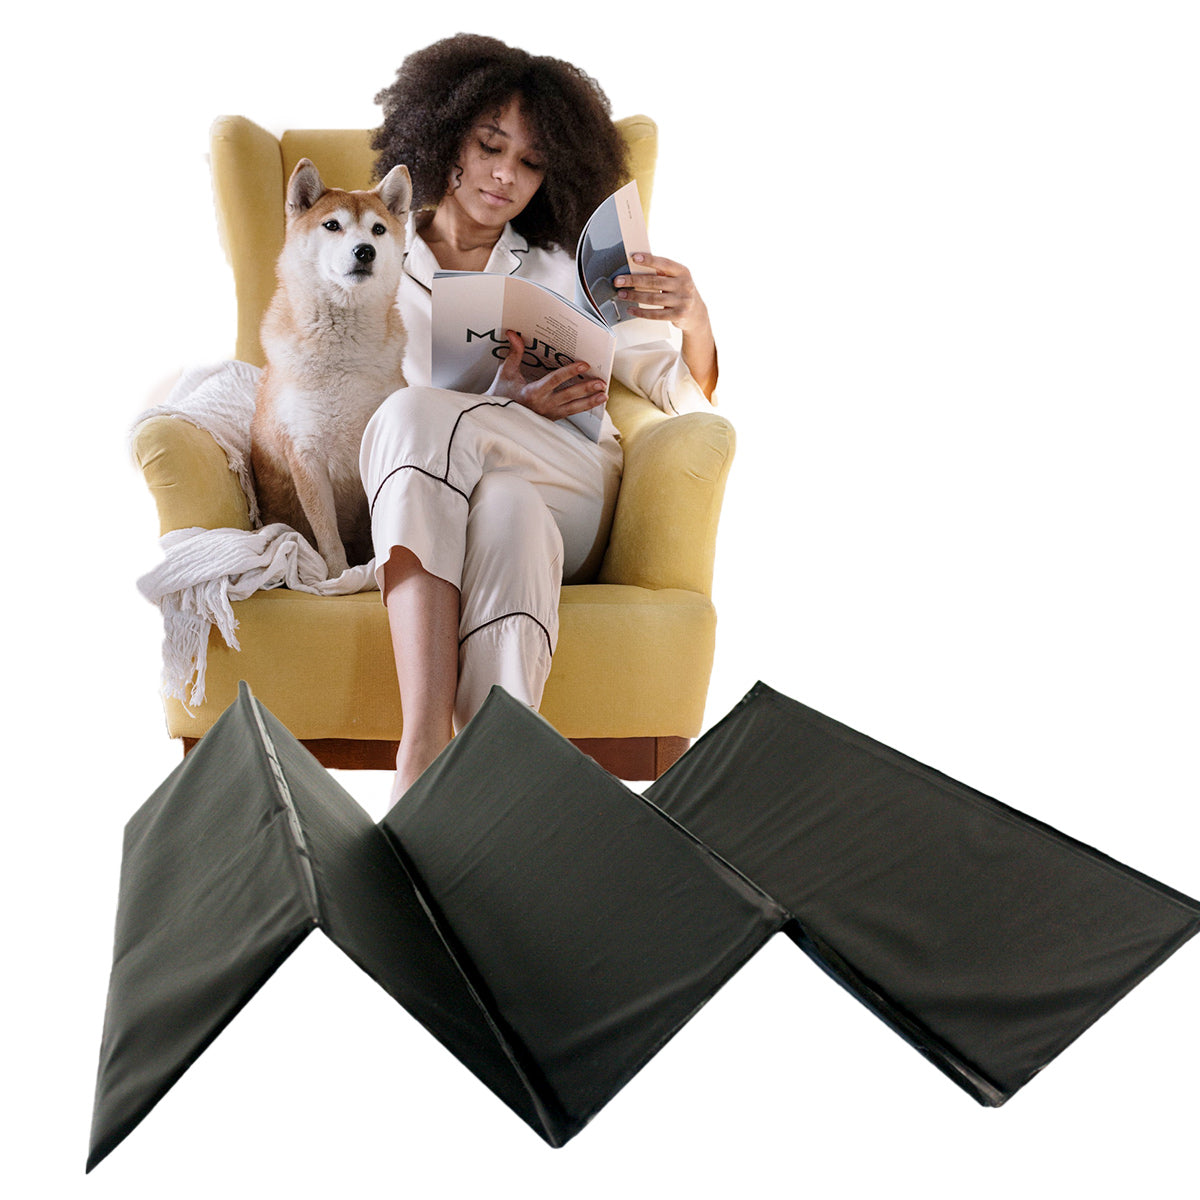 Couch Cushion Support | Sofa Seat Savers